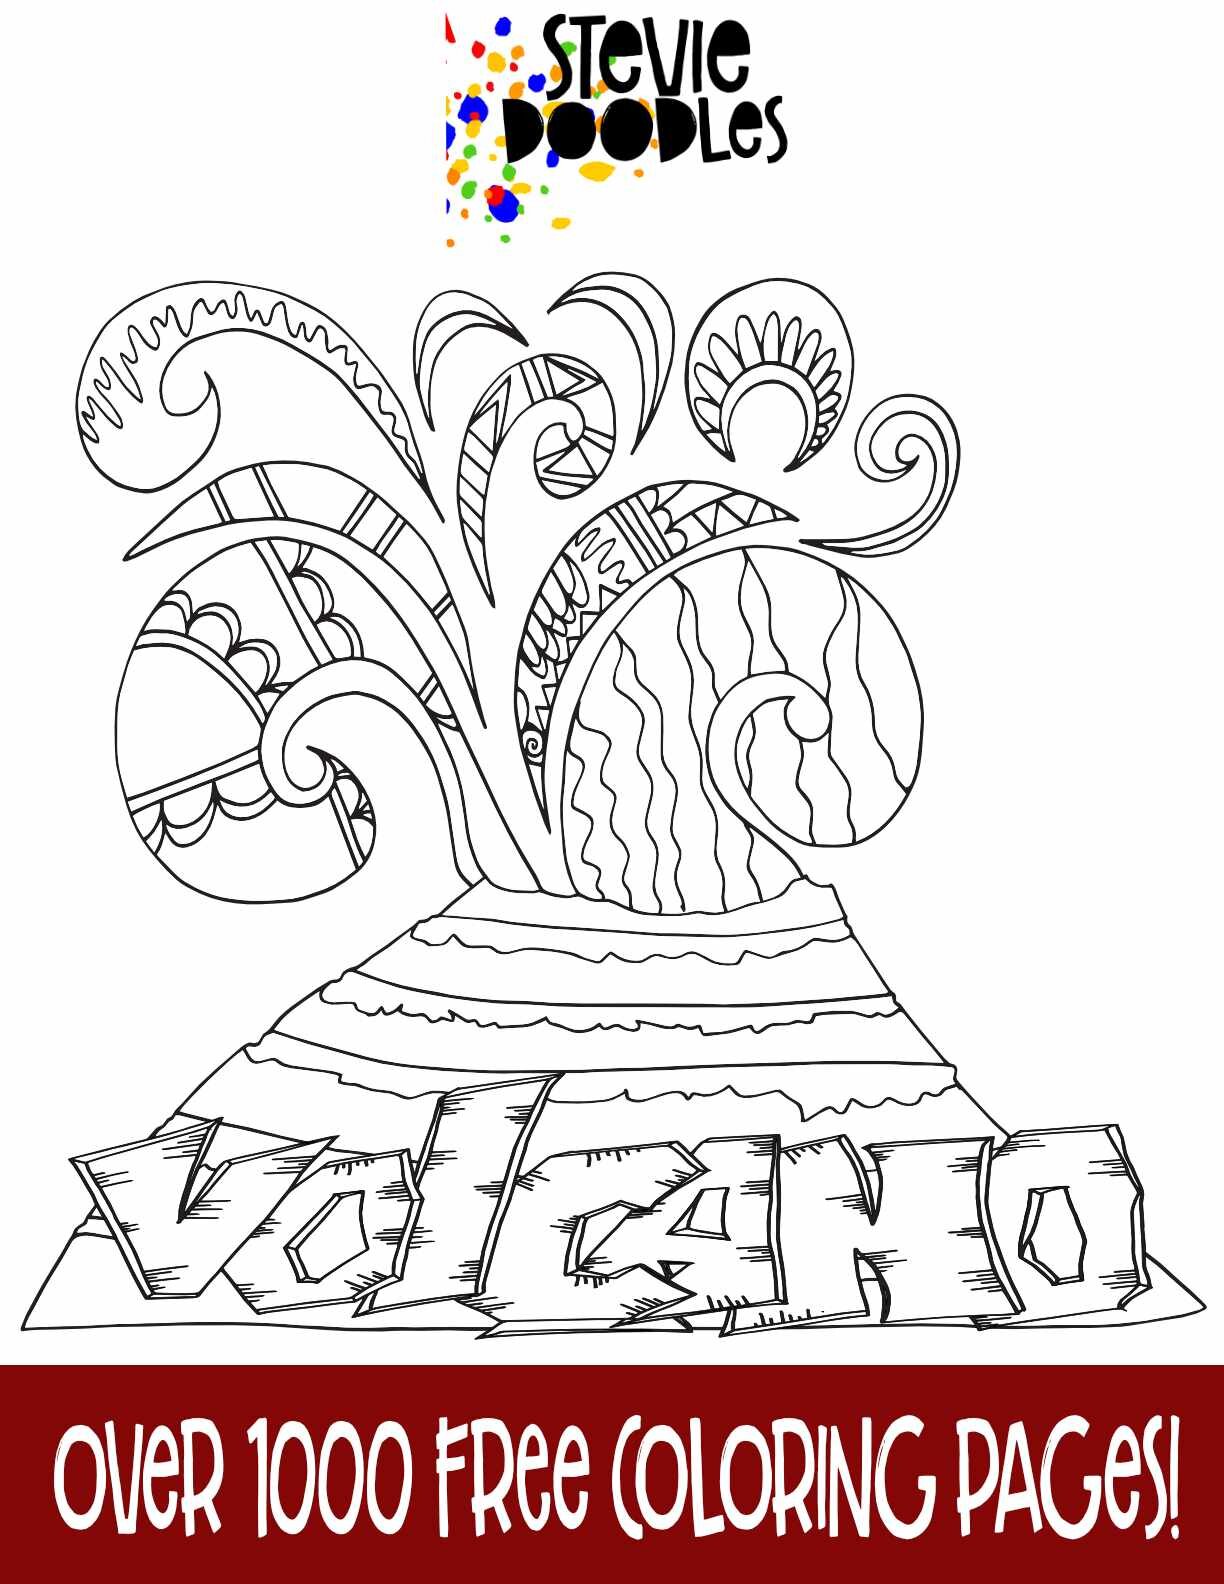 Volcano free coloring page â stevie doodles